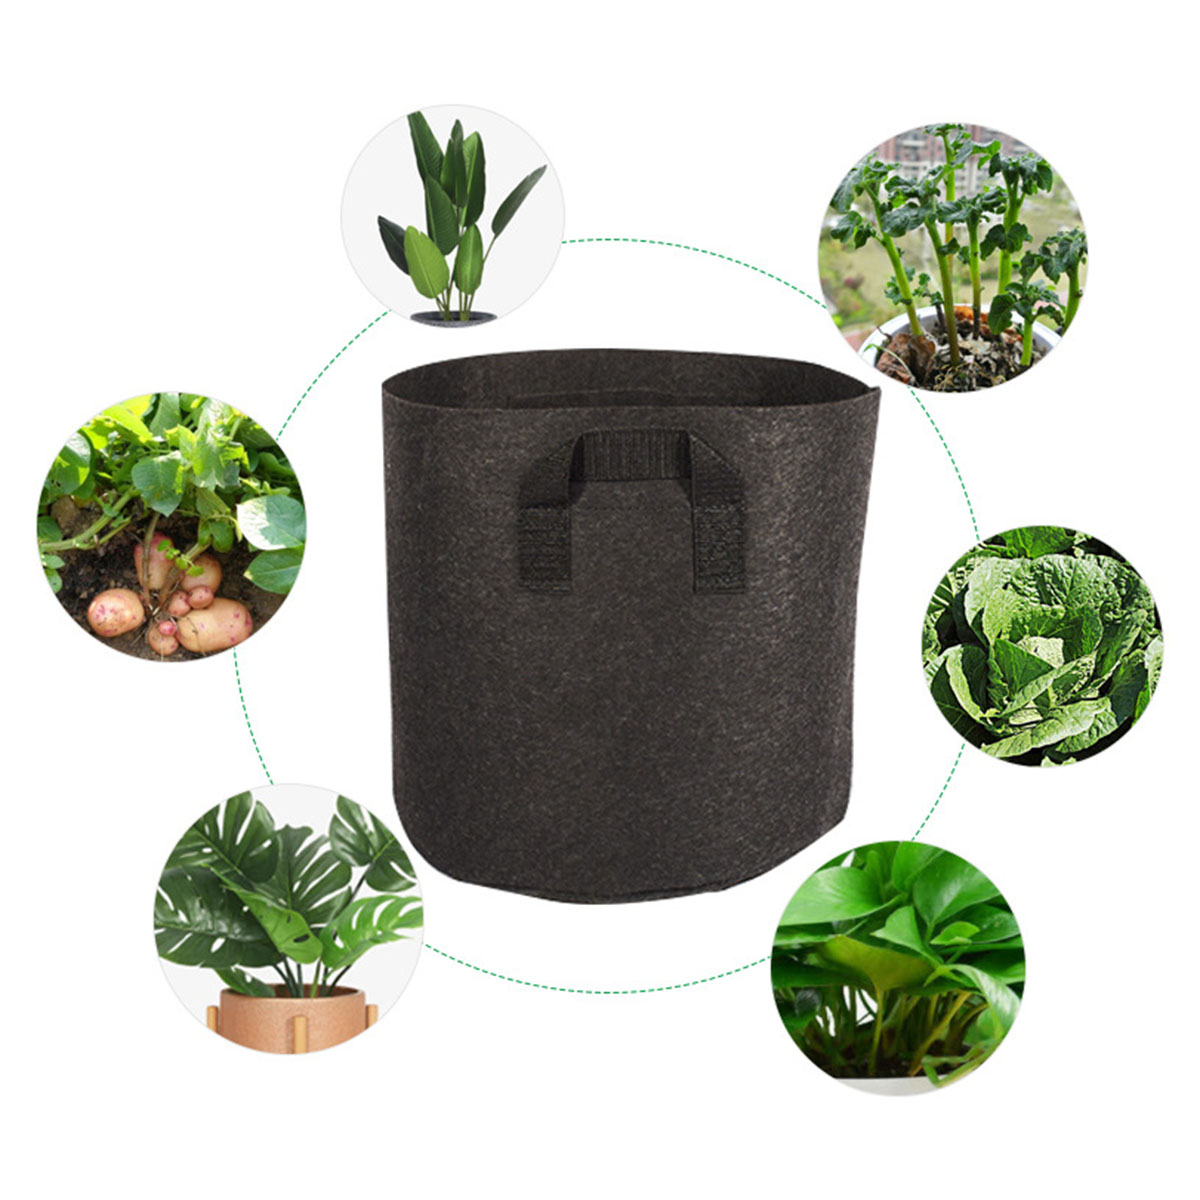 Non-woven-Fabric-Planting-Grow-Box-Vegetable-Flower-Pots-Bag-Planter-Black-with-Handles-1678096-6